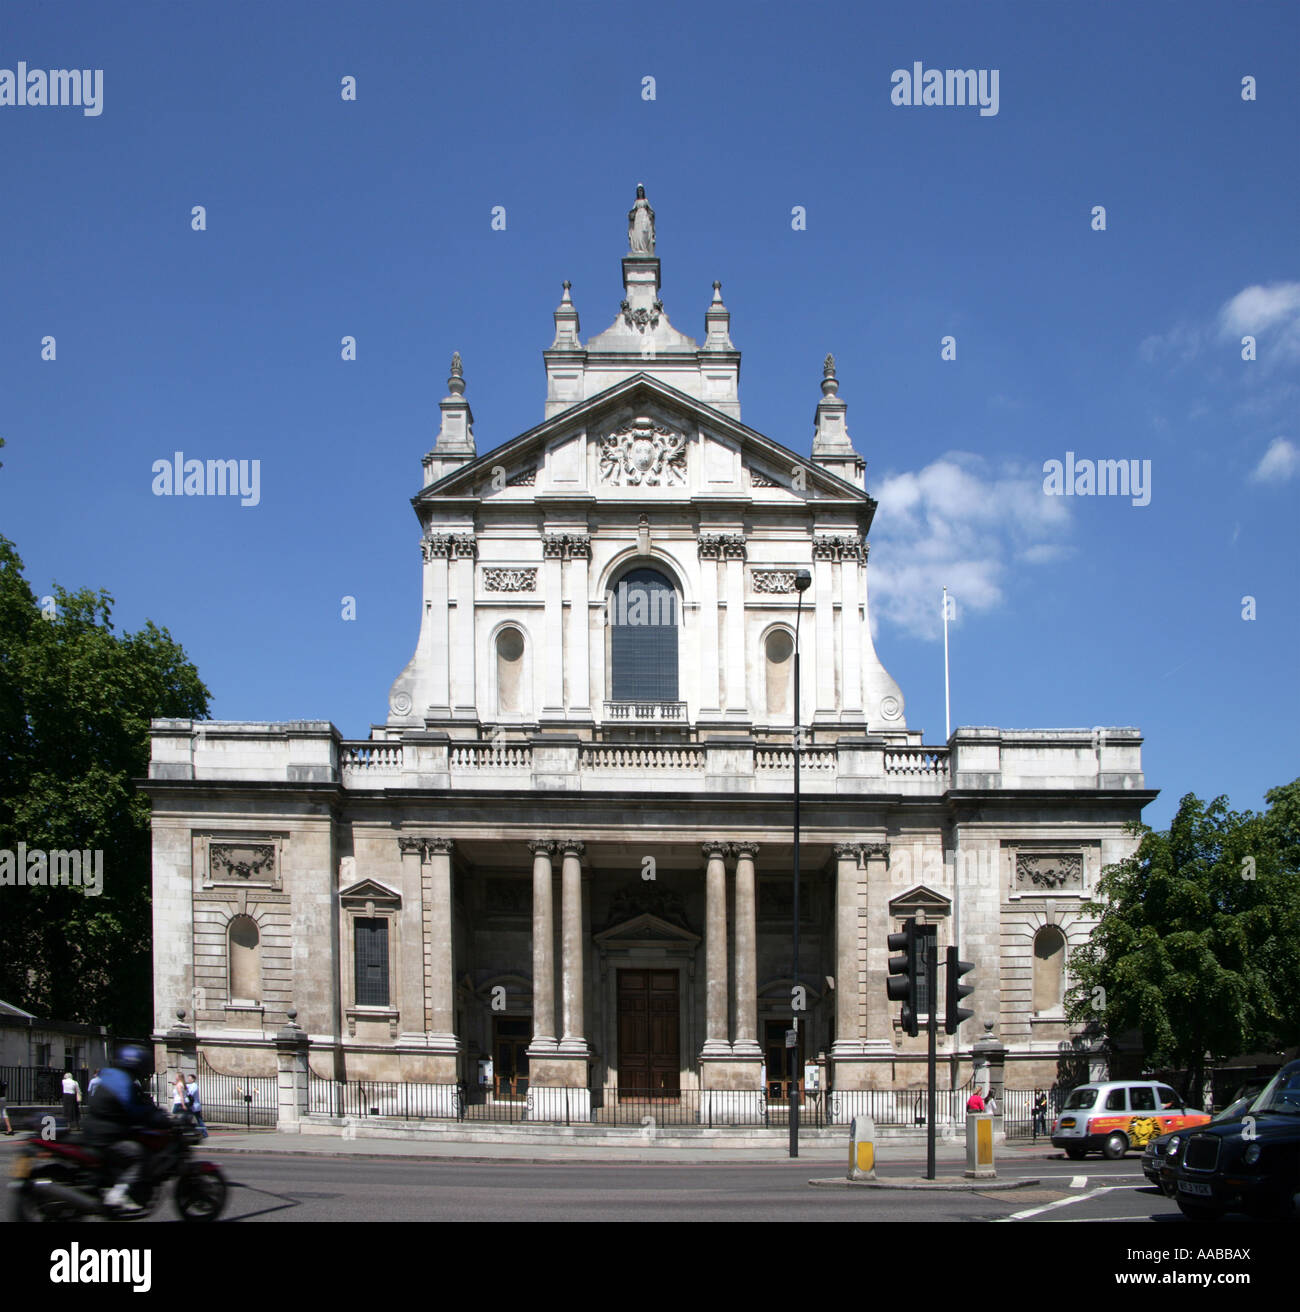 Brompton Oratory Cromwell Road London Banque D'Images